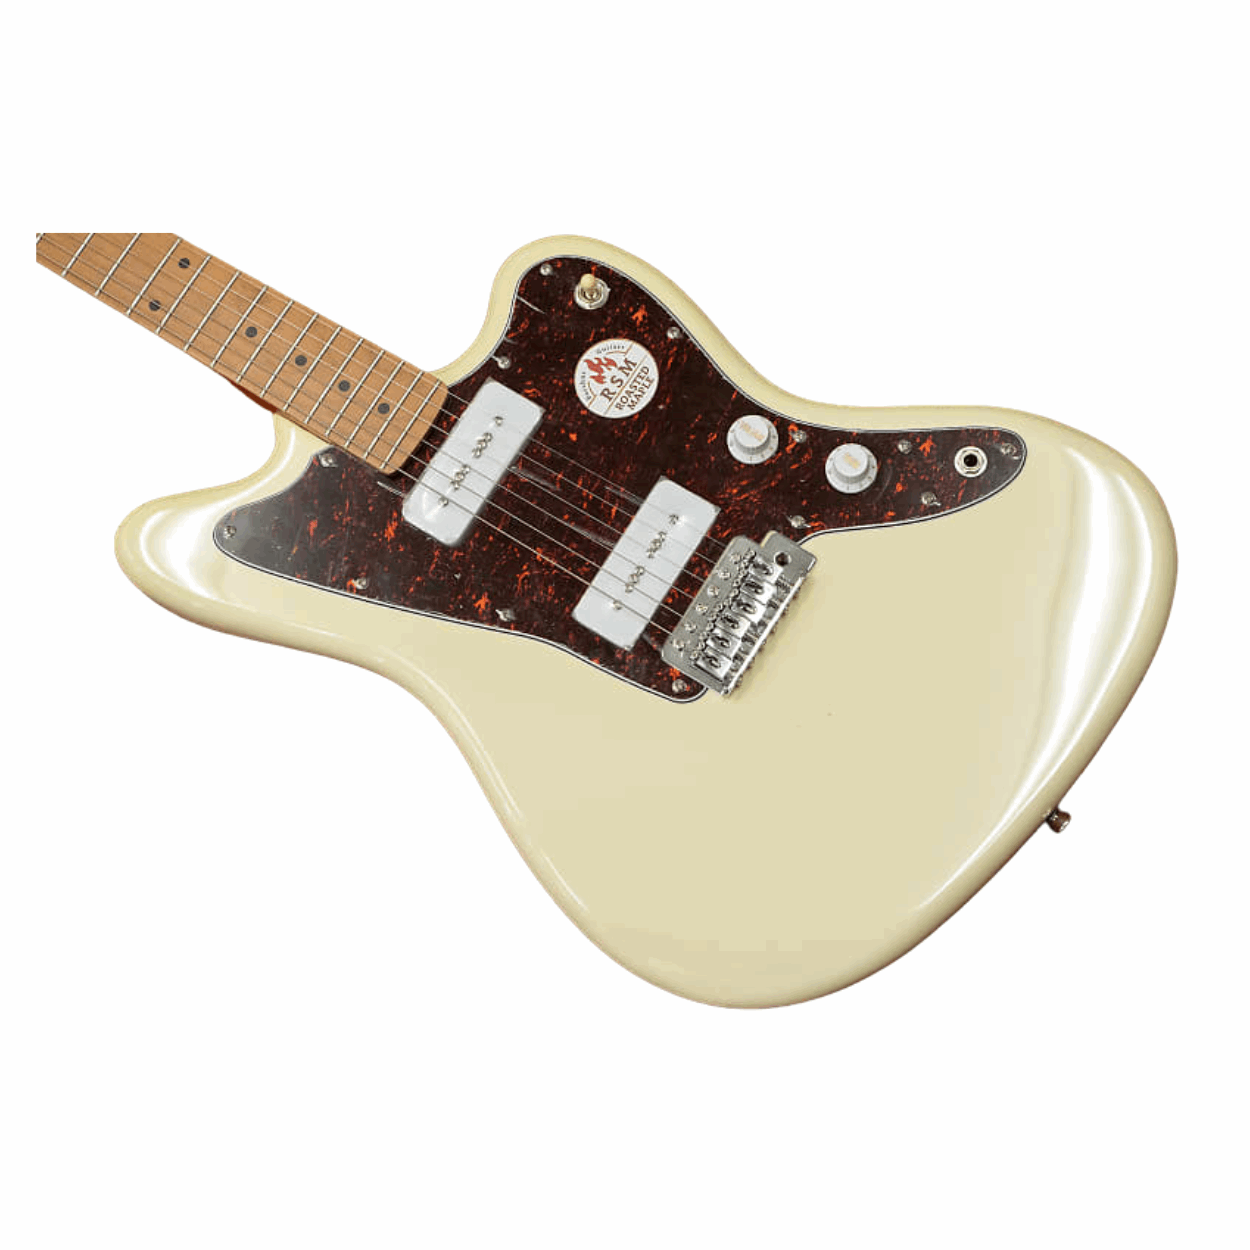 Bacchus Bjm-1rsm/m-owh Universe Series Roasted Maple Electric Guitar, Olympic White With Bag